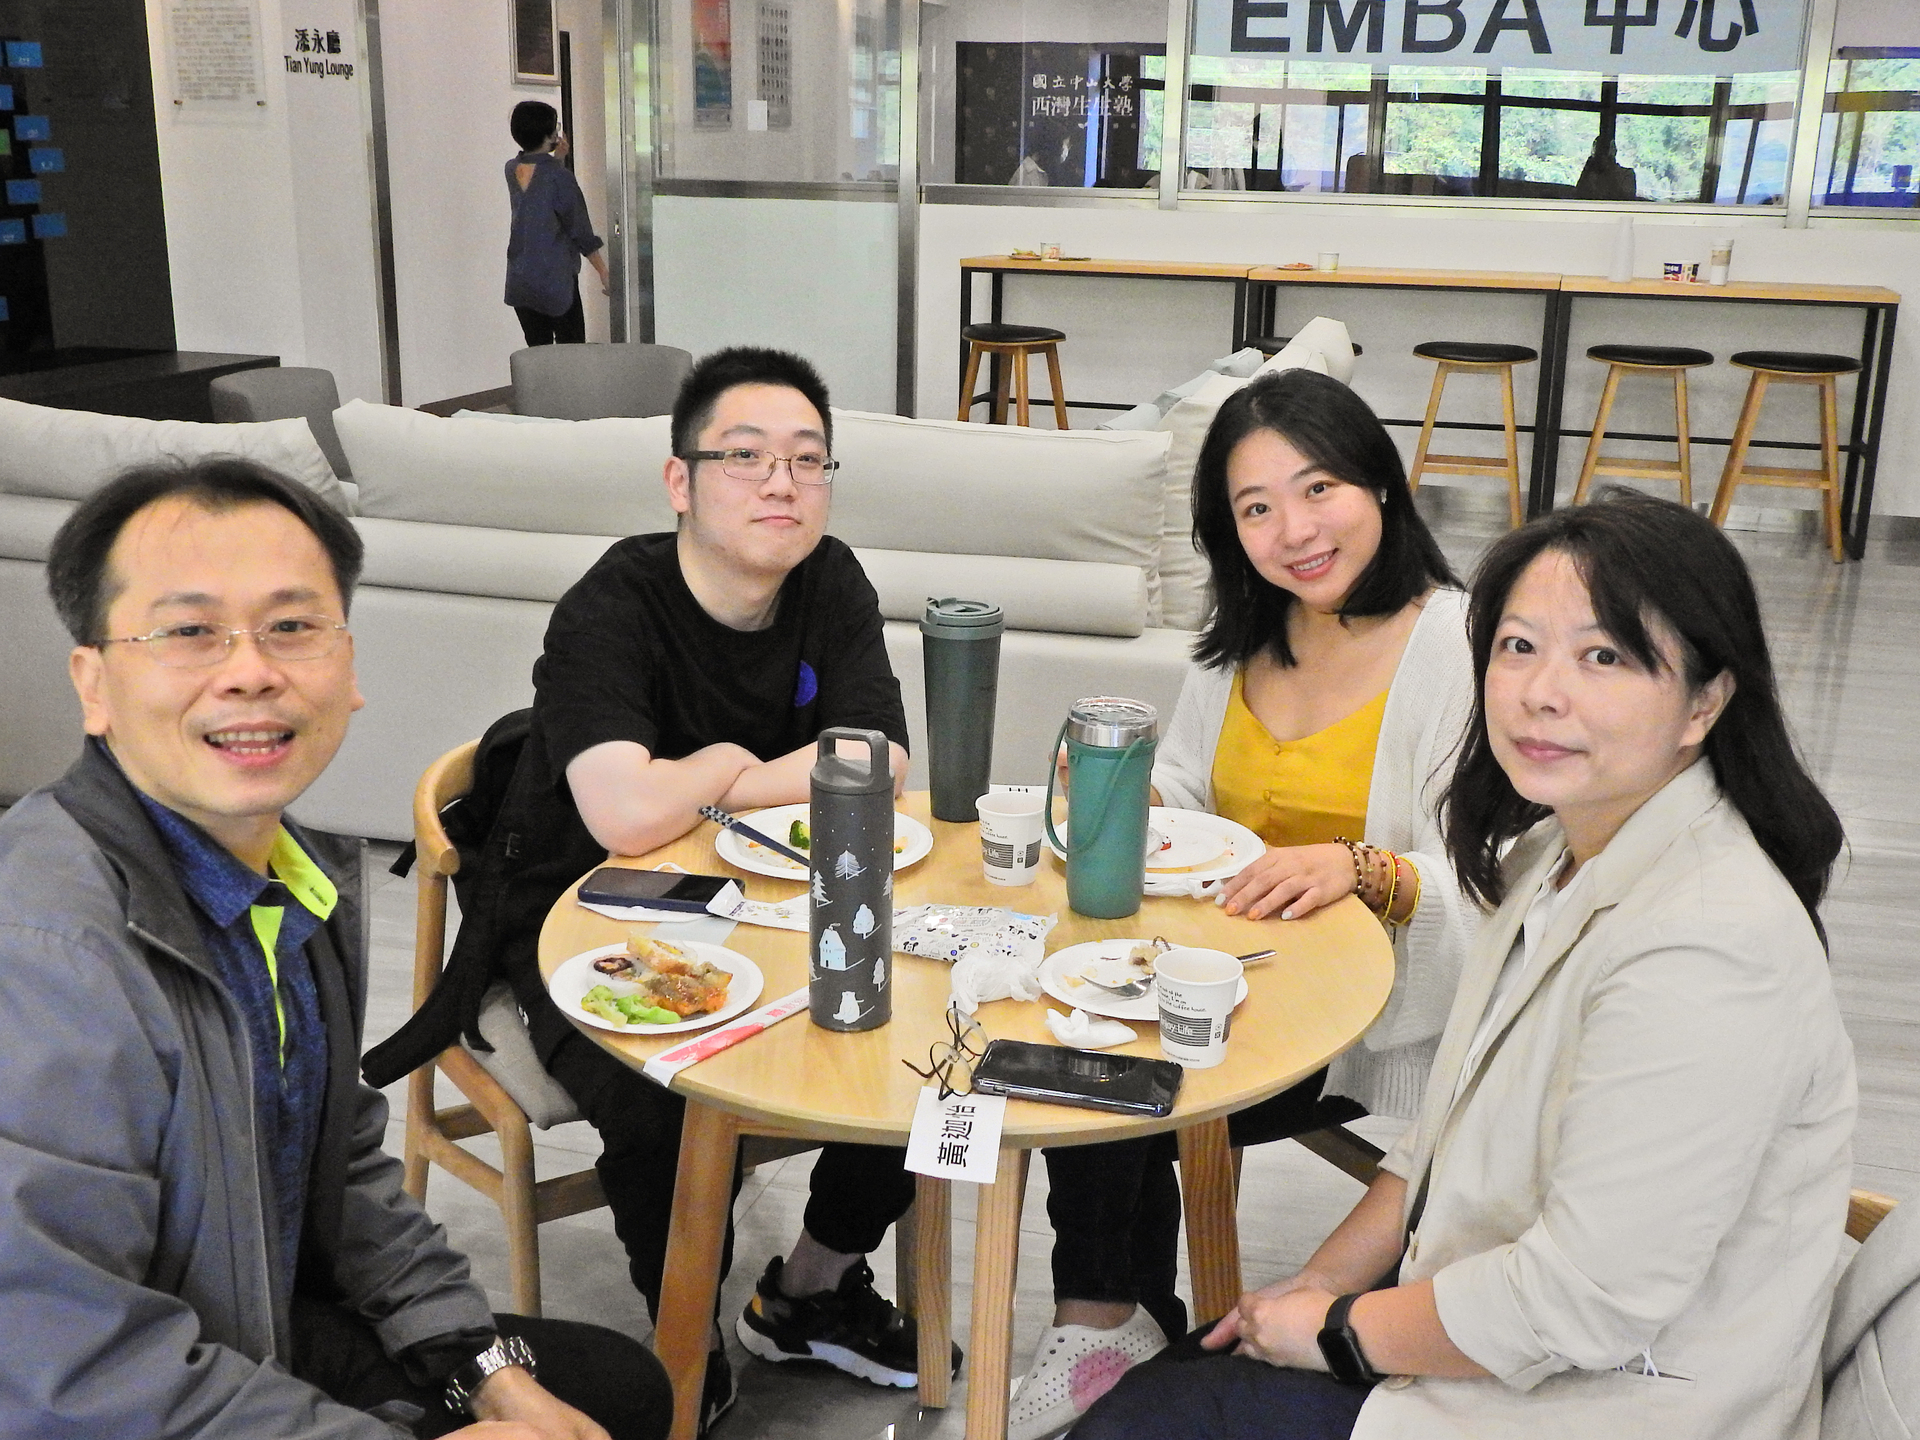 Professor Shih-sian Chang of the Department of Finance (left) communicates with doctoral students